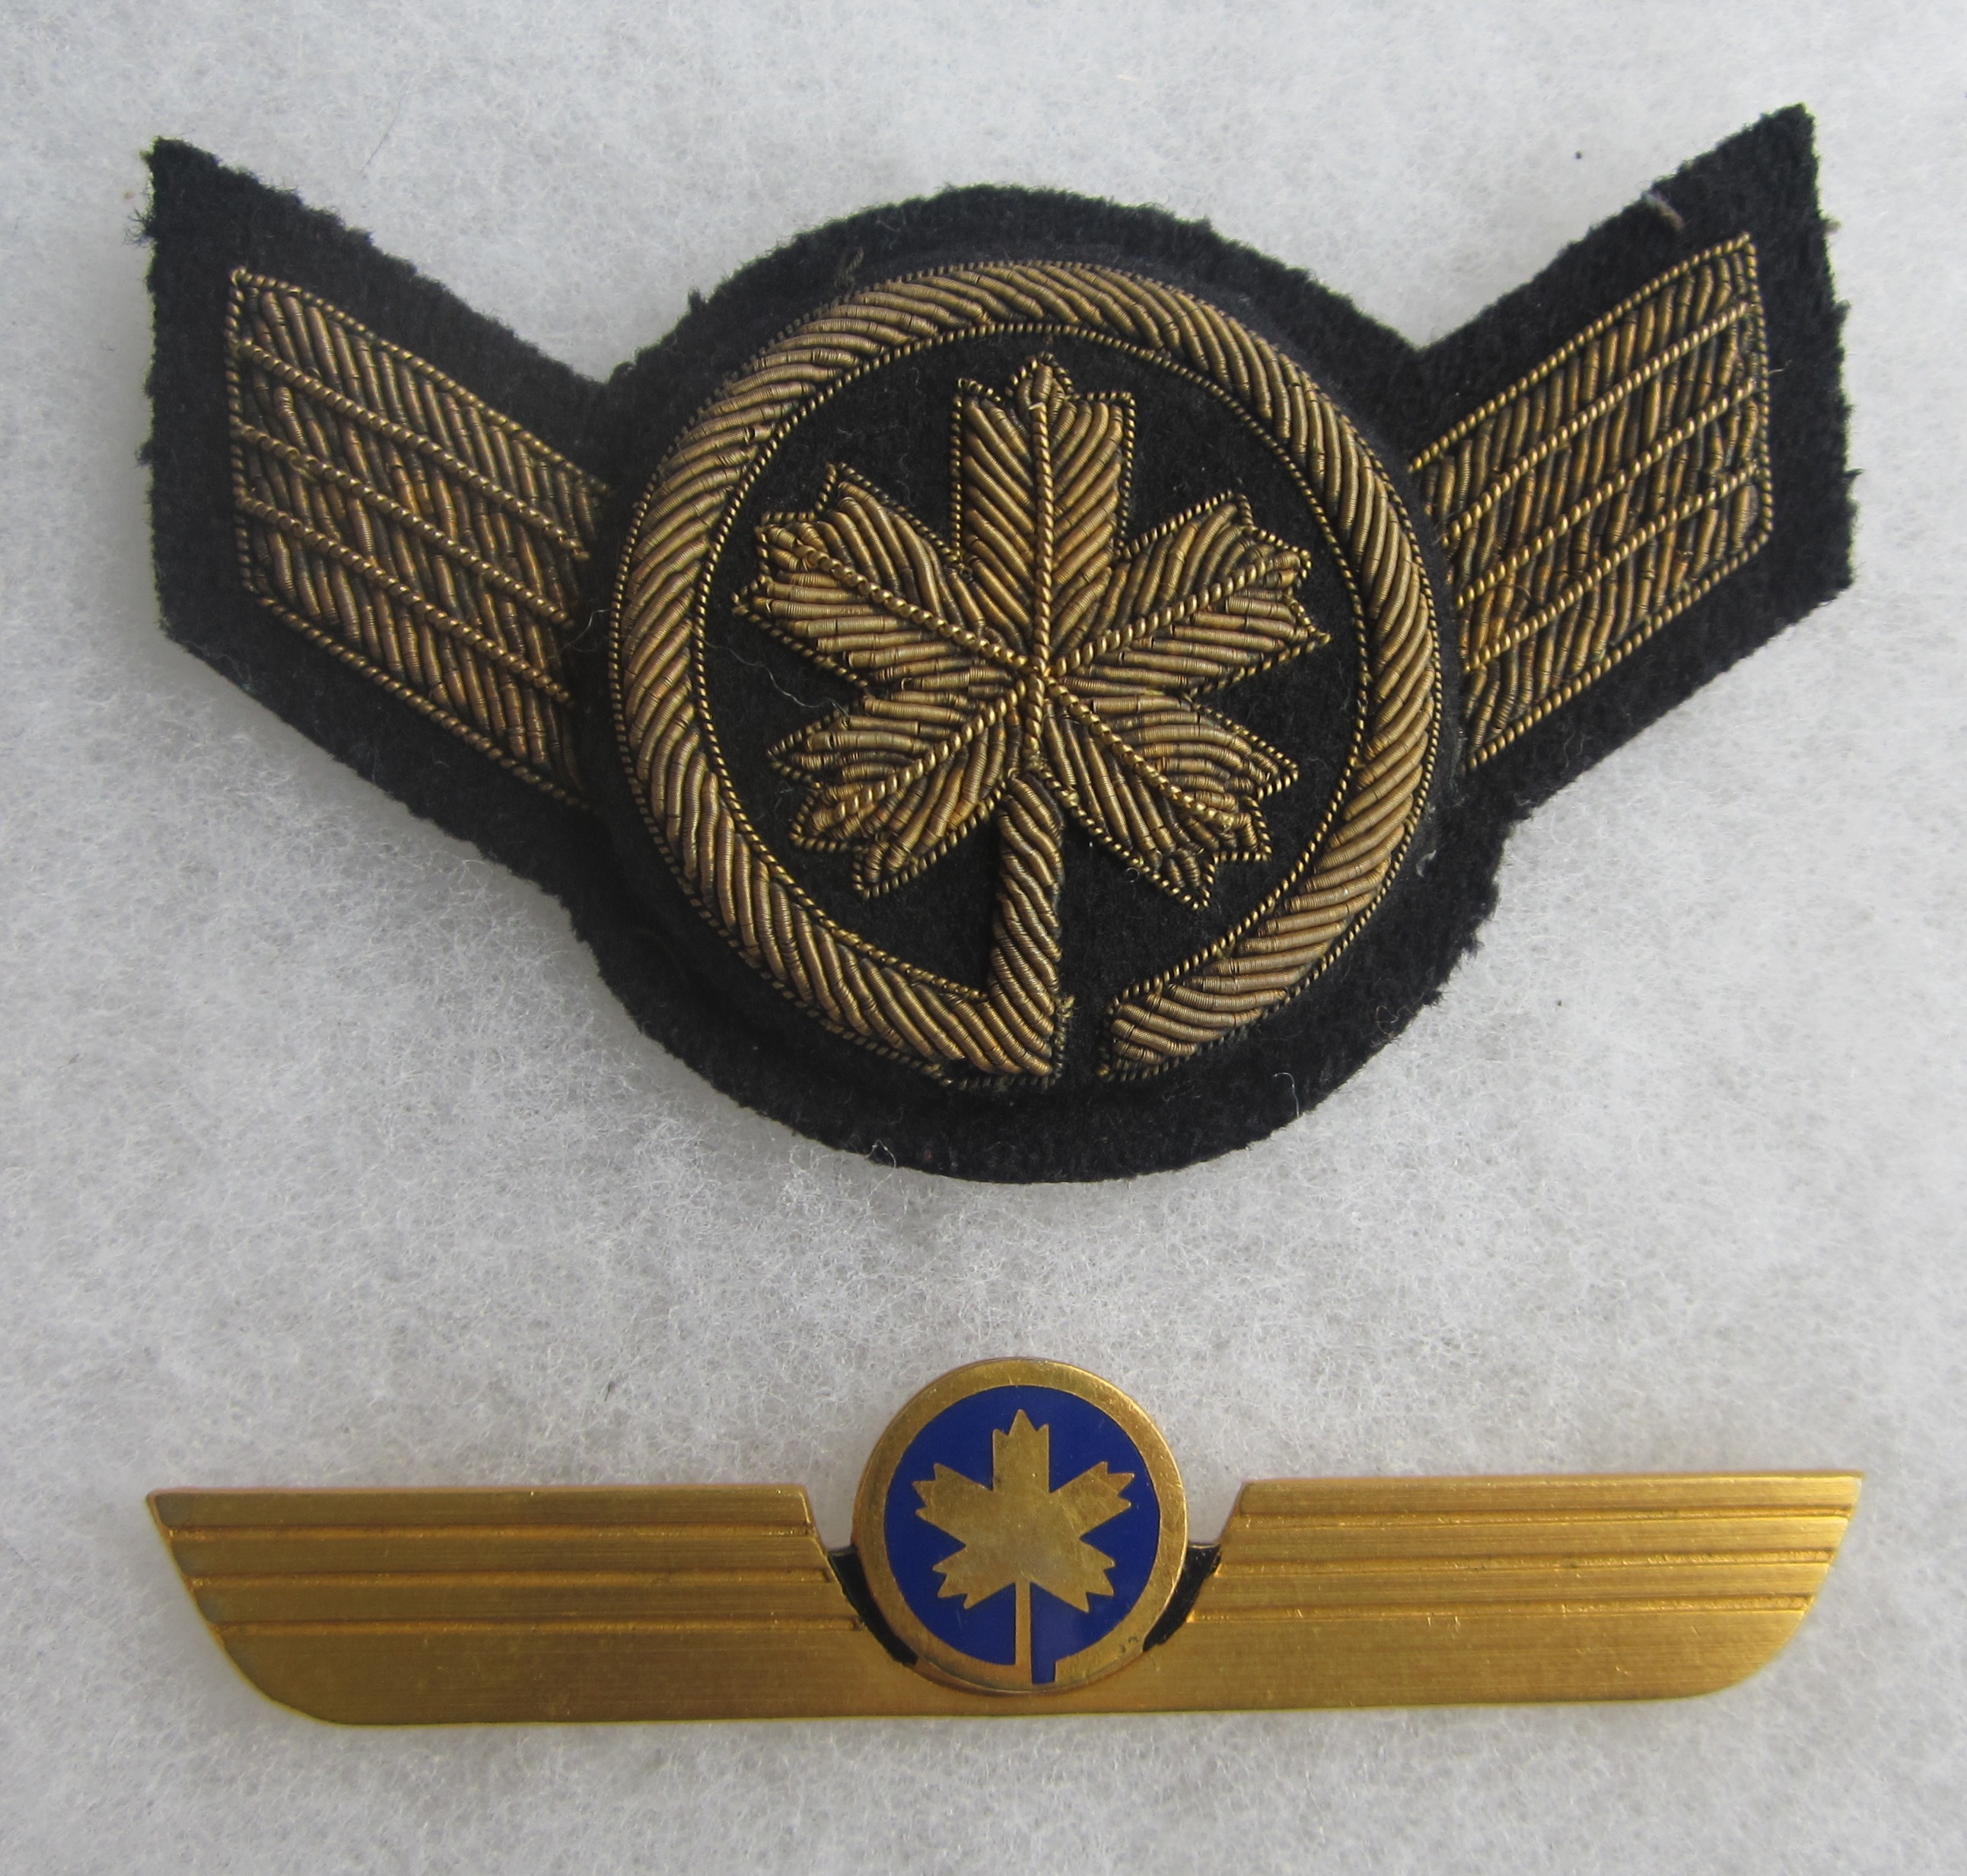 13385 AIR CANADA CANADIAN AIRLINES MAPLE LEAF AIRWAYS LOGO AVIATION PIN BADGE 